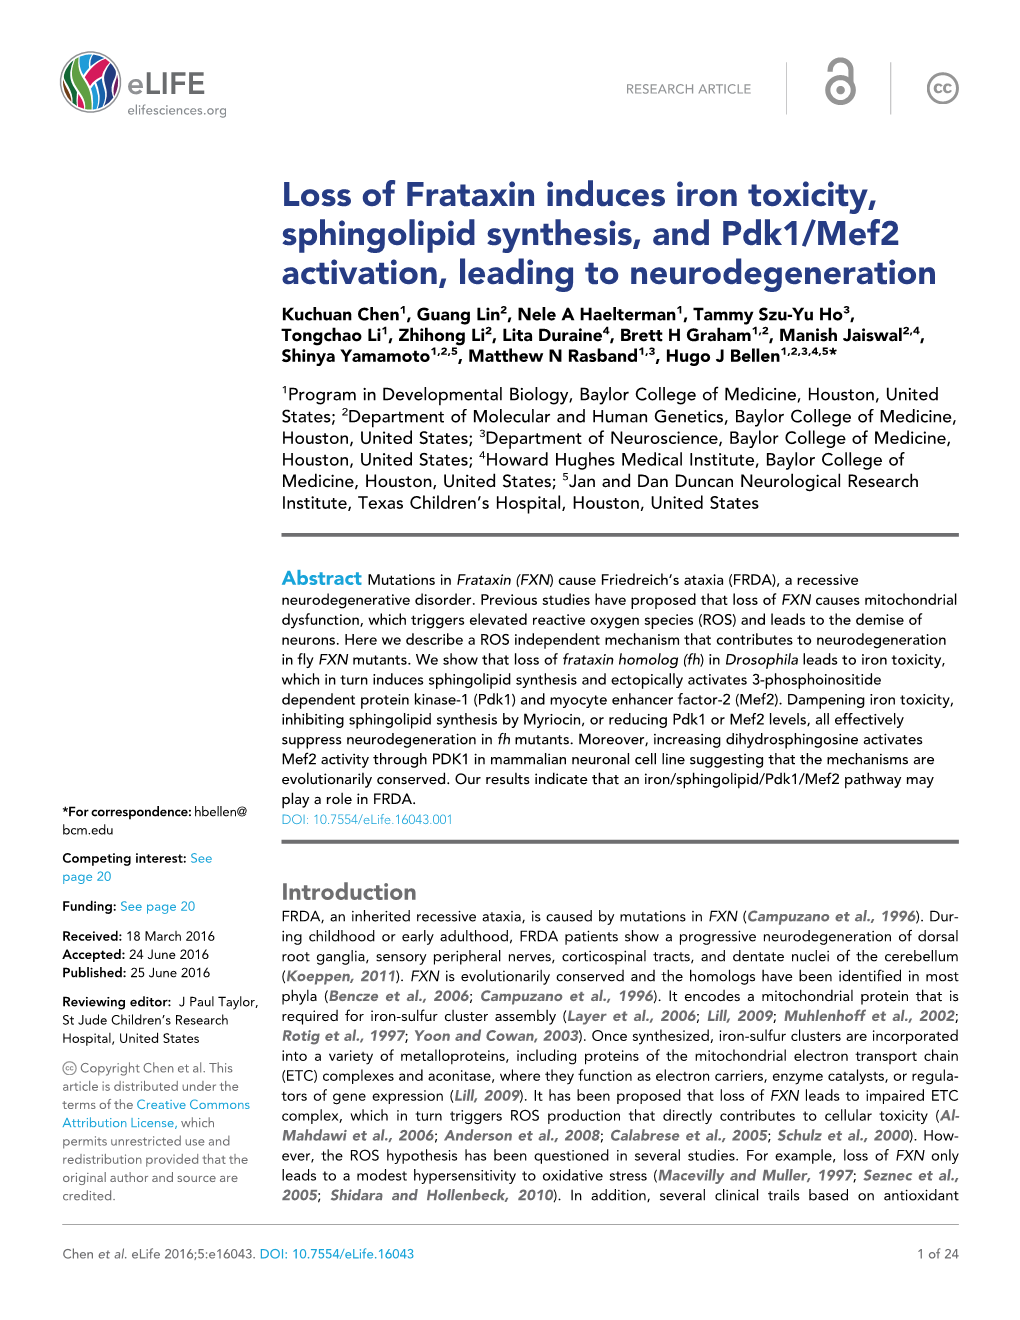 Loss of Frataxin Induces Iron Toxicity, Sphingolipid Synthesis, and Pdk1